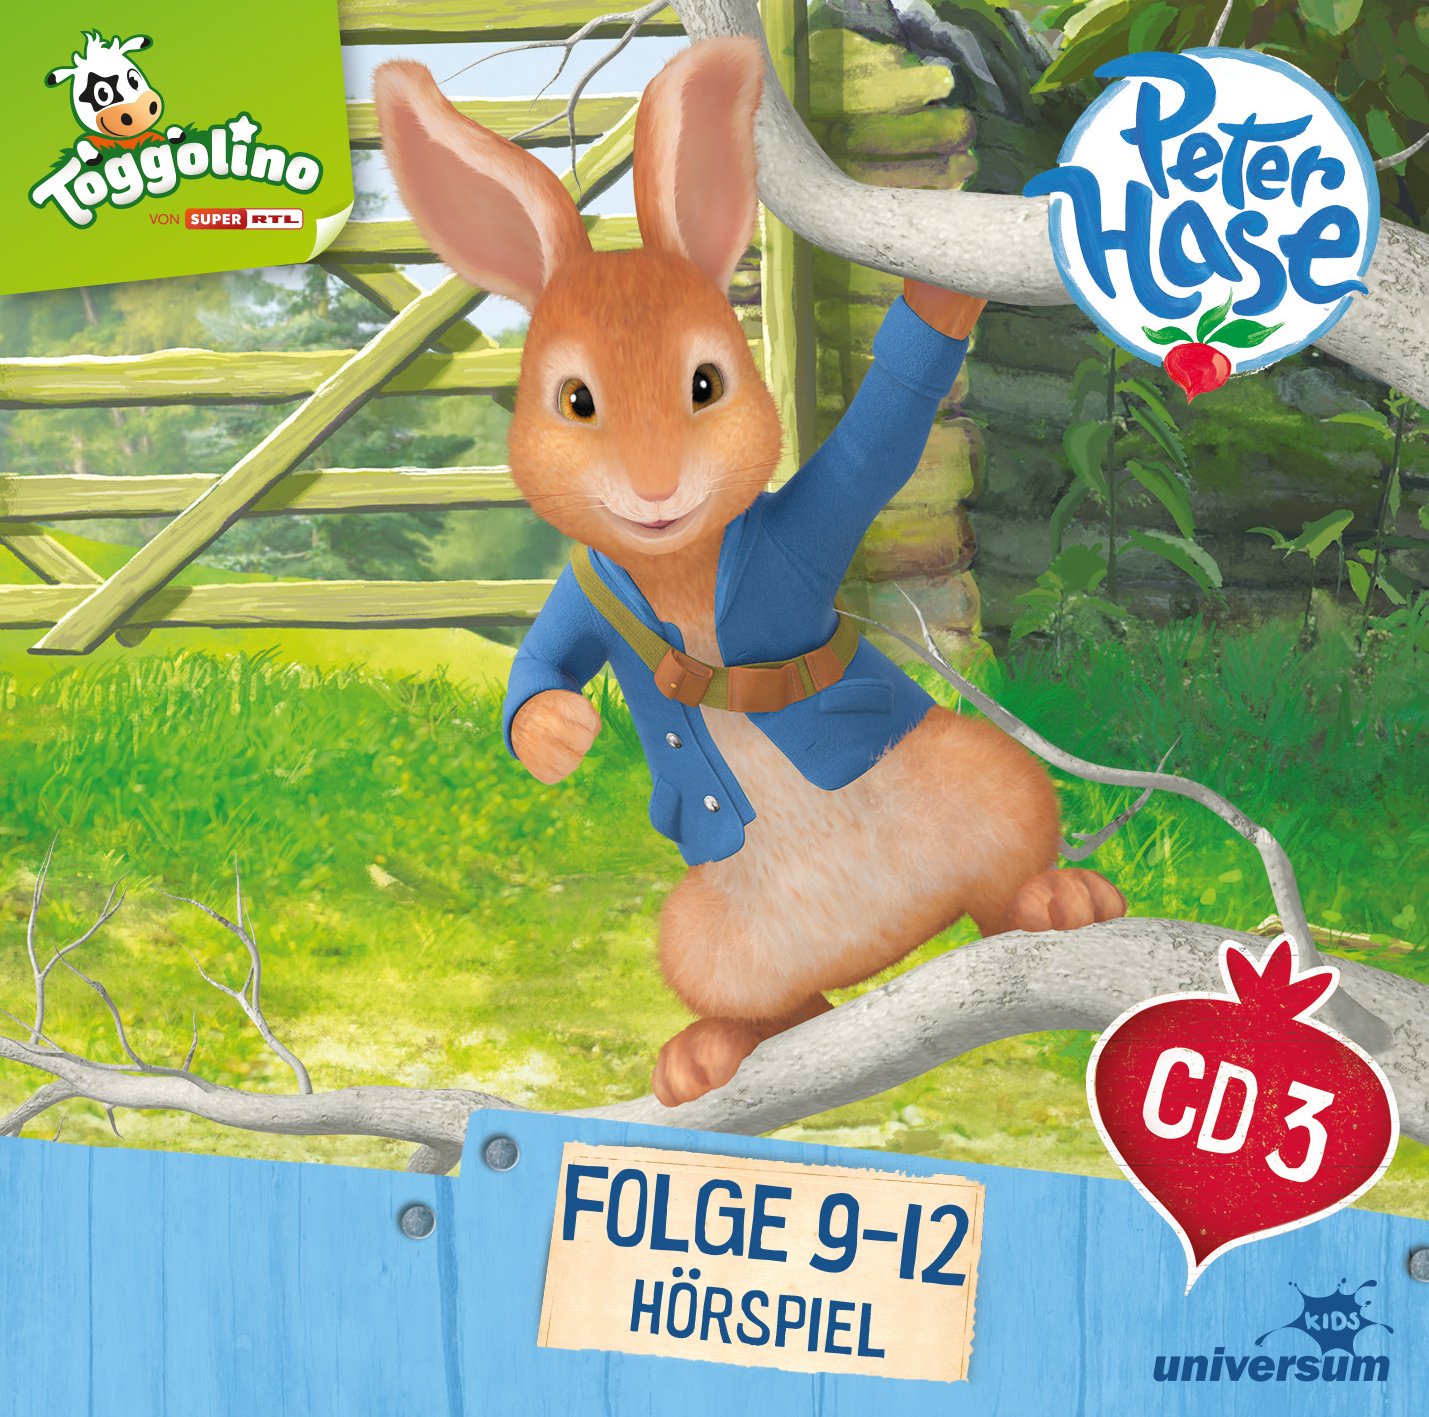 Peter Hase-CD 3